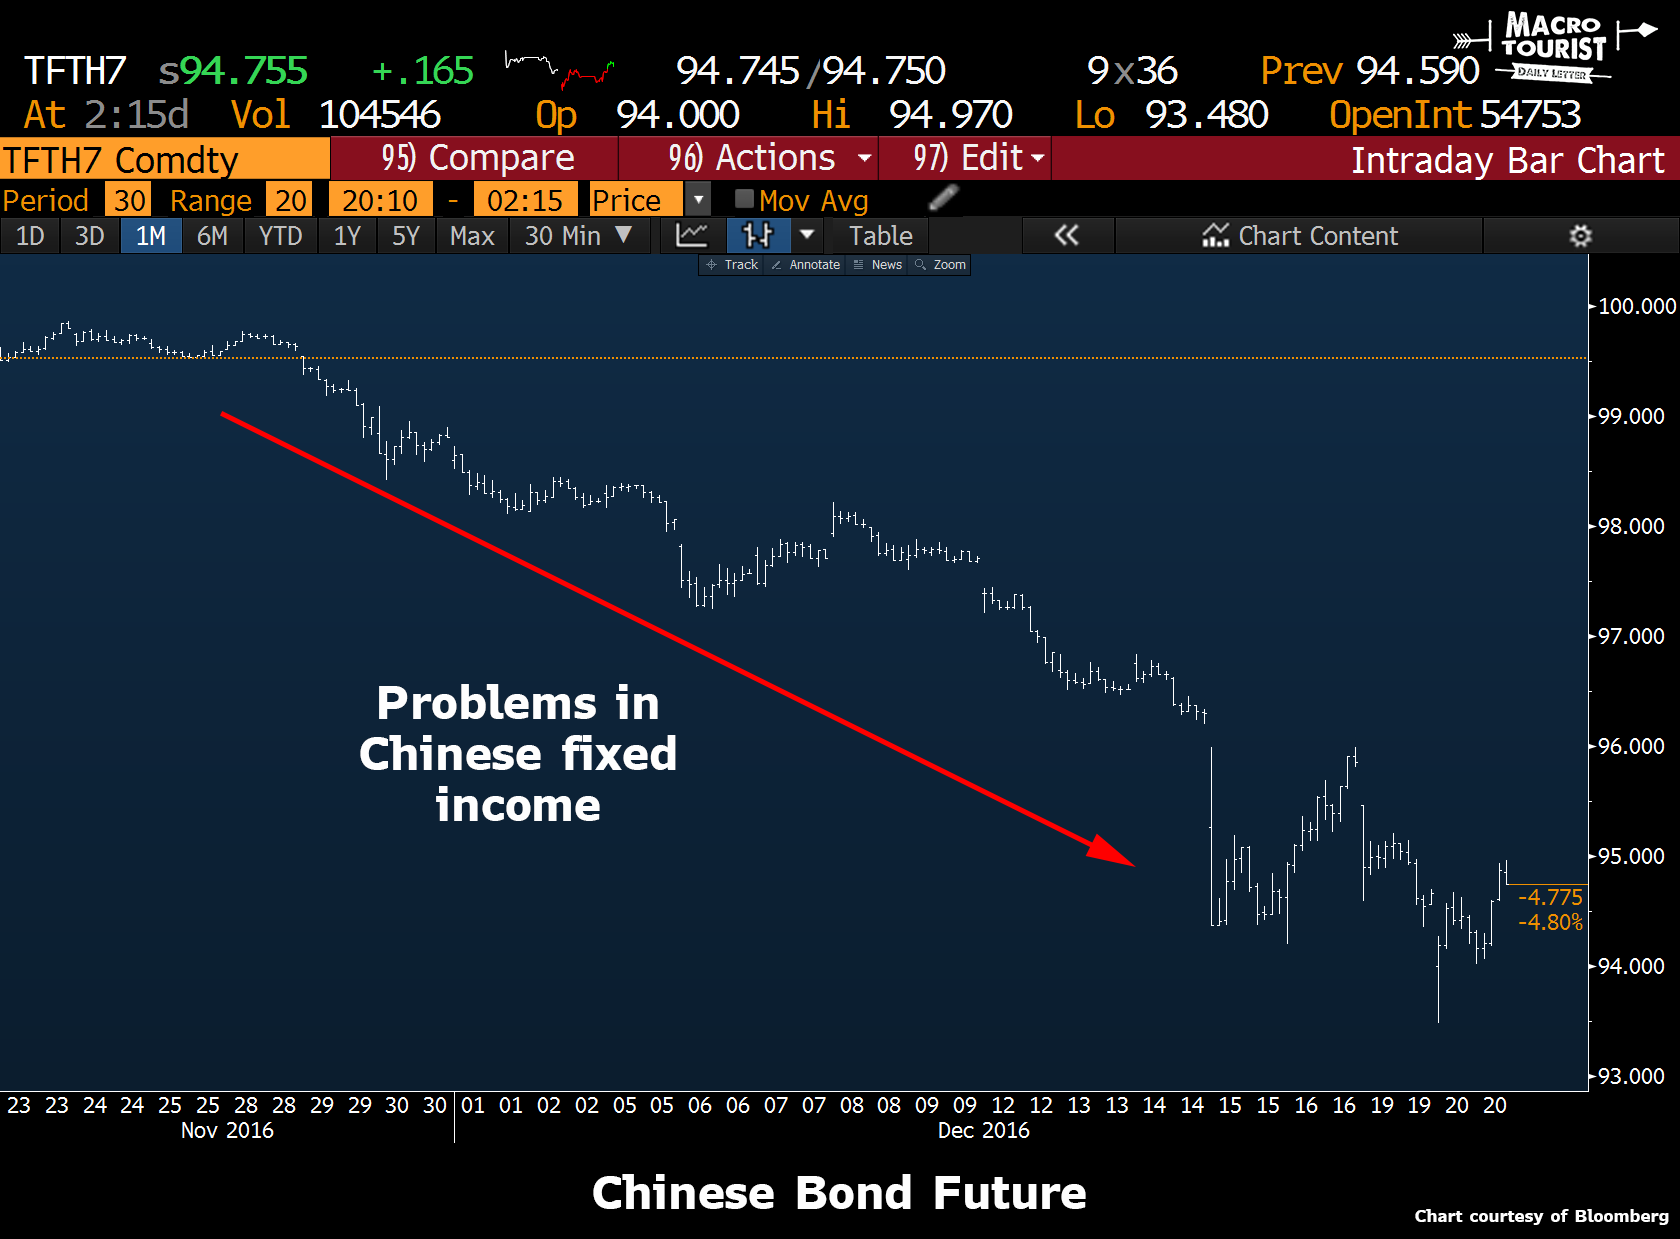 http://themacrotourist.com/images/ChineseBondDec2016.png